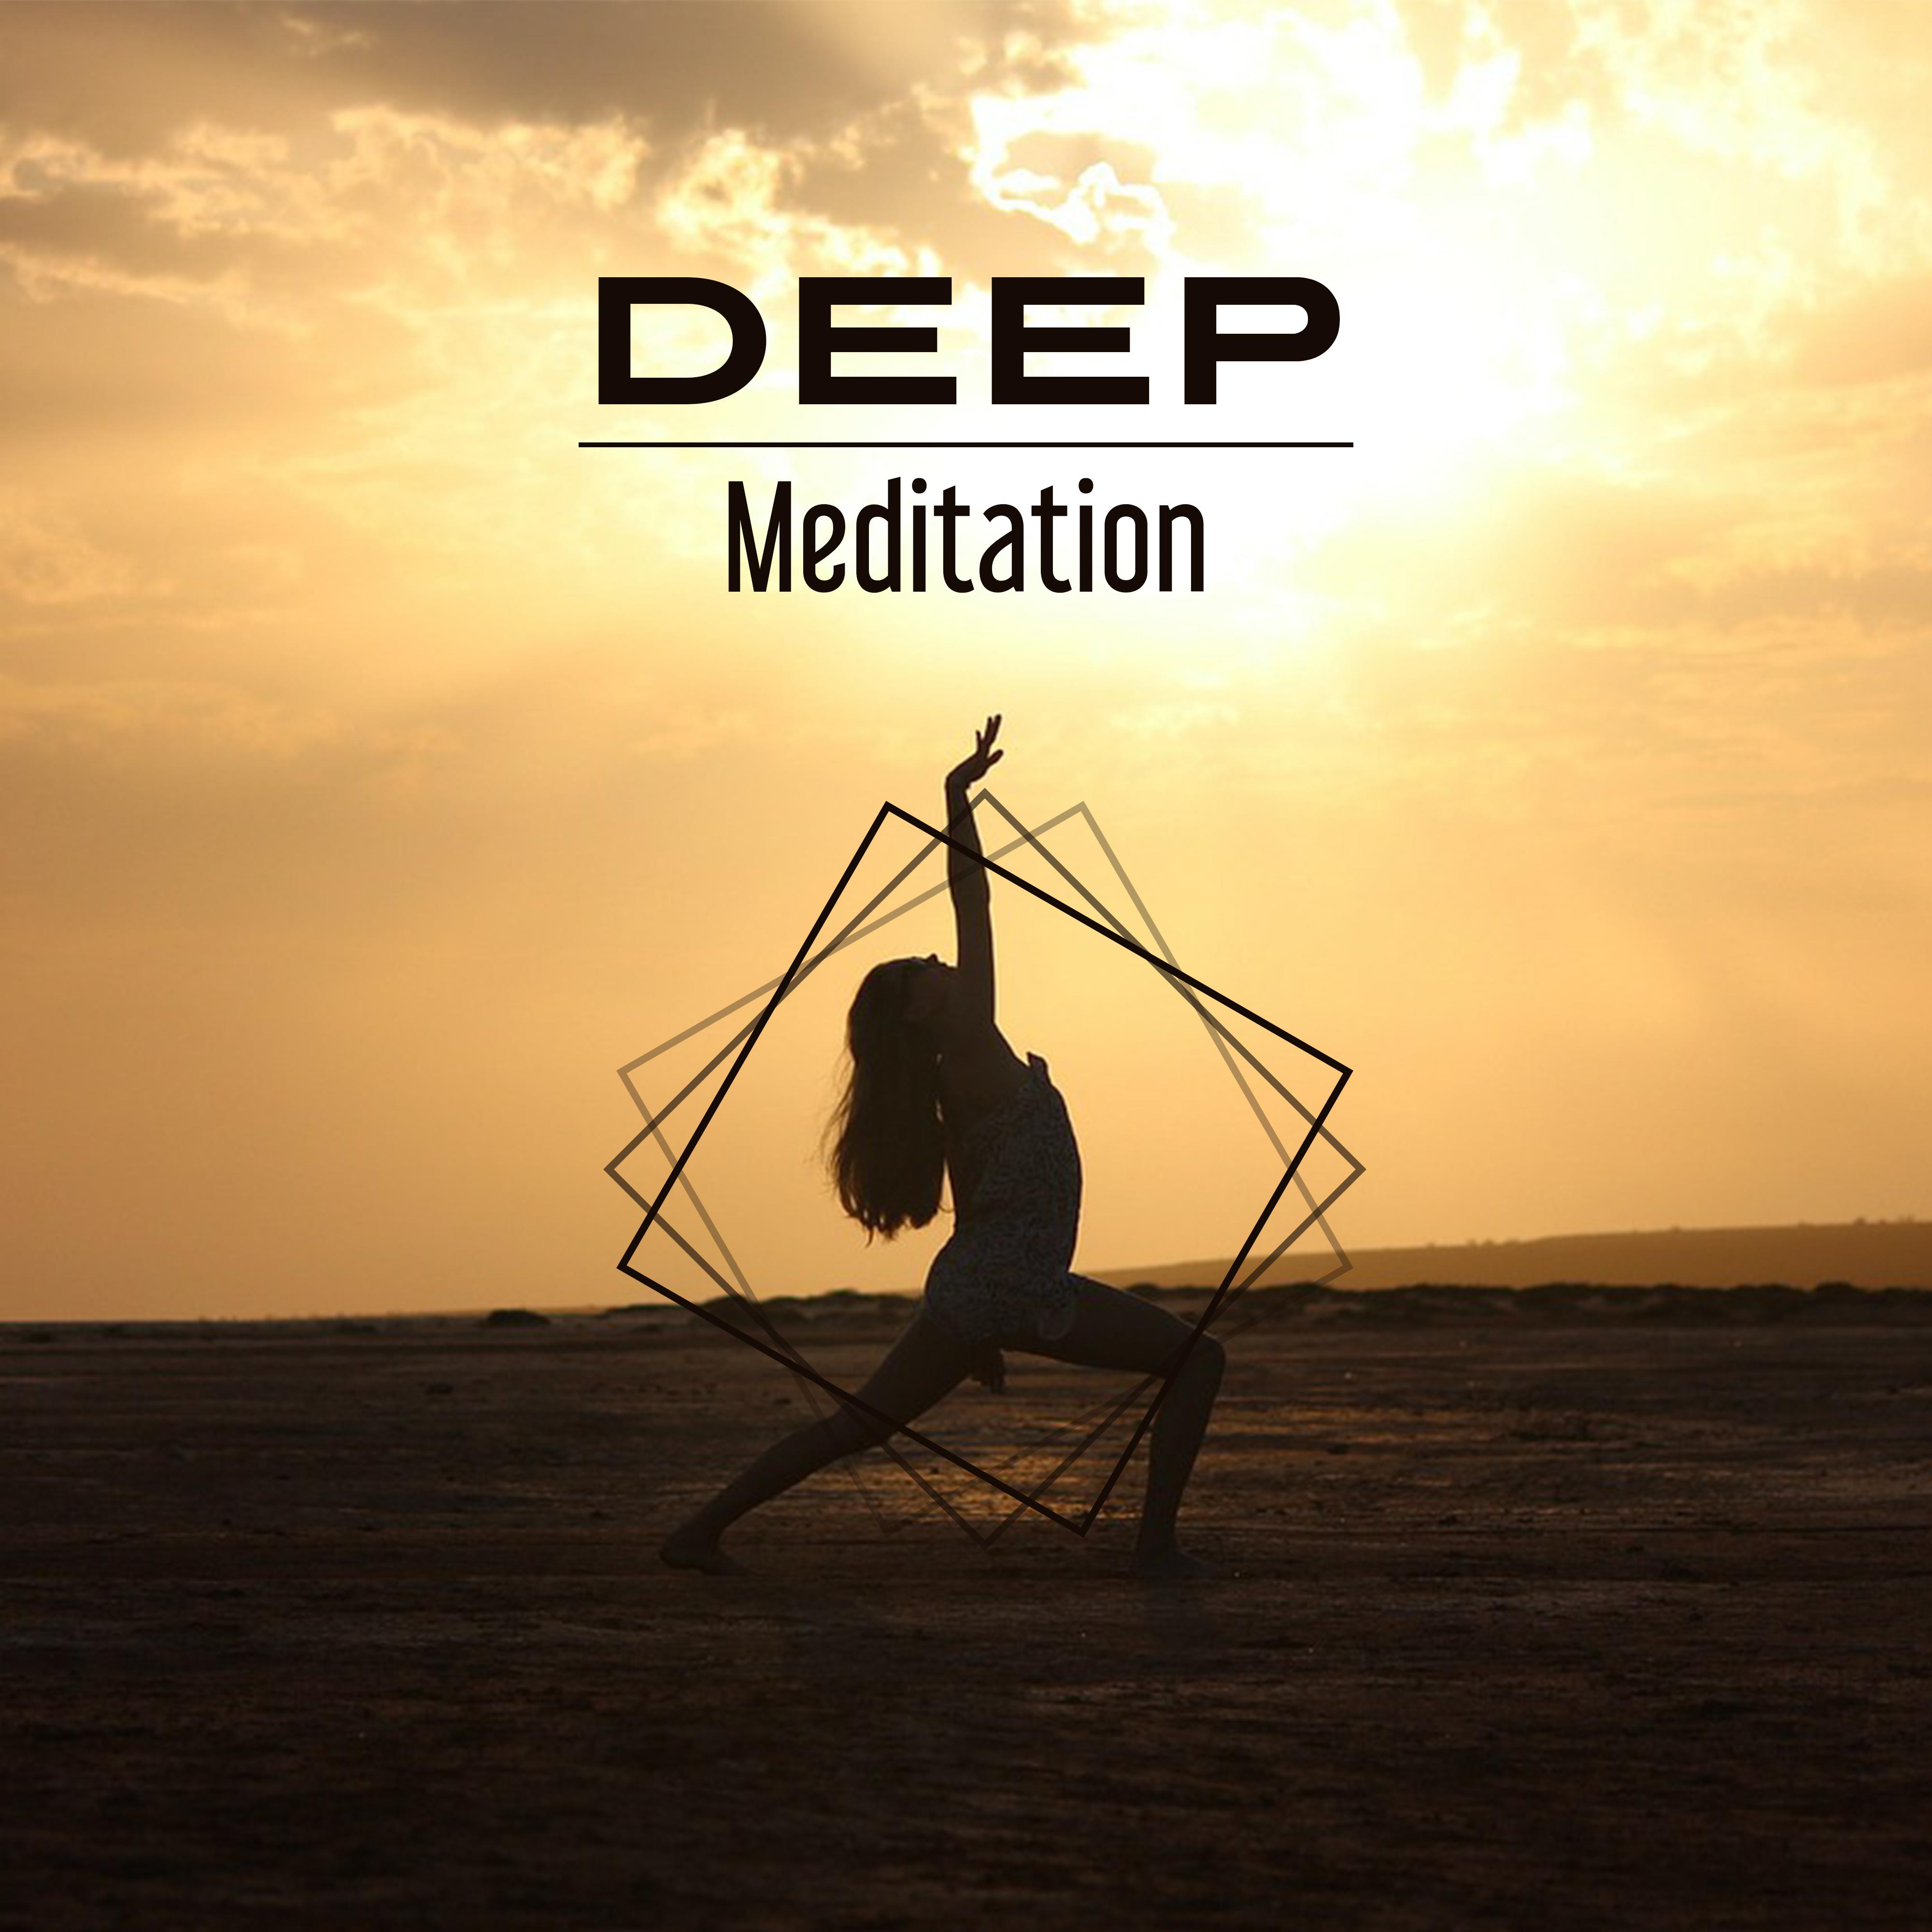 Deep Meditation  Yoga Sounds, Reiki Healing, Nature Sounds for Relaxation, Music Reduces Stress, Meditate